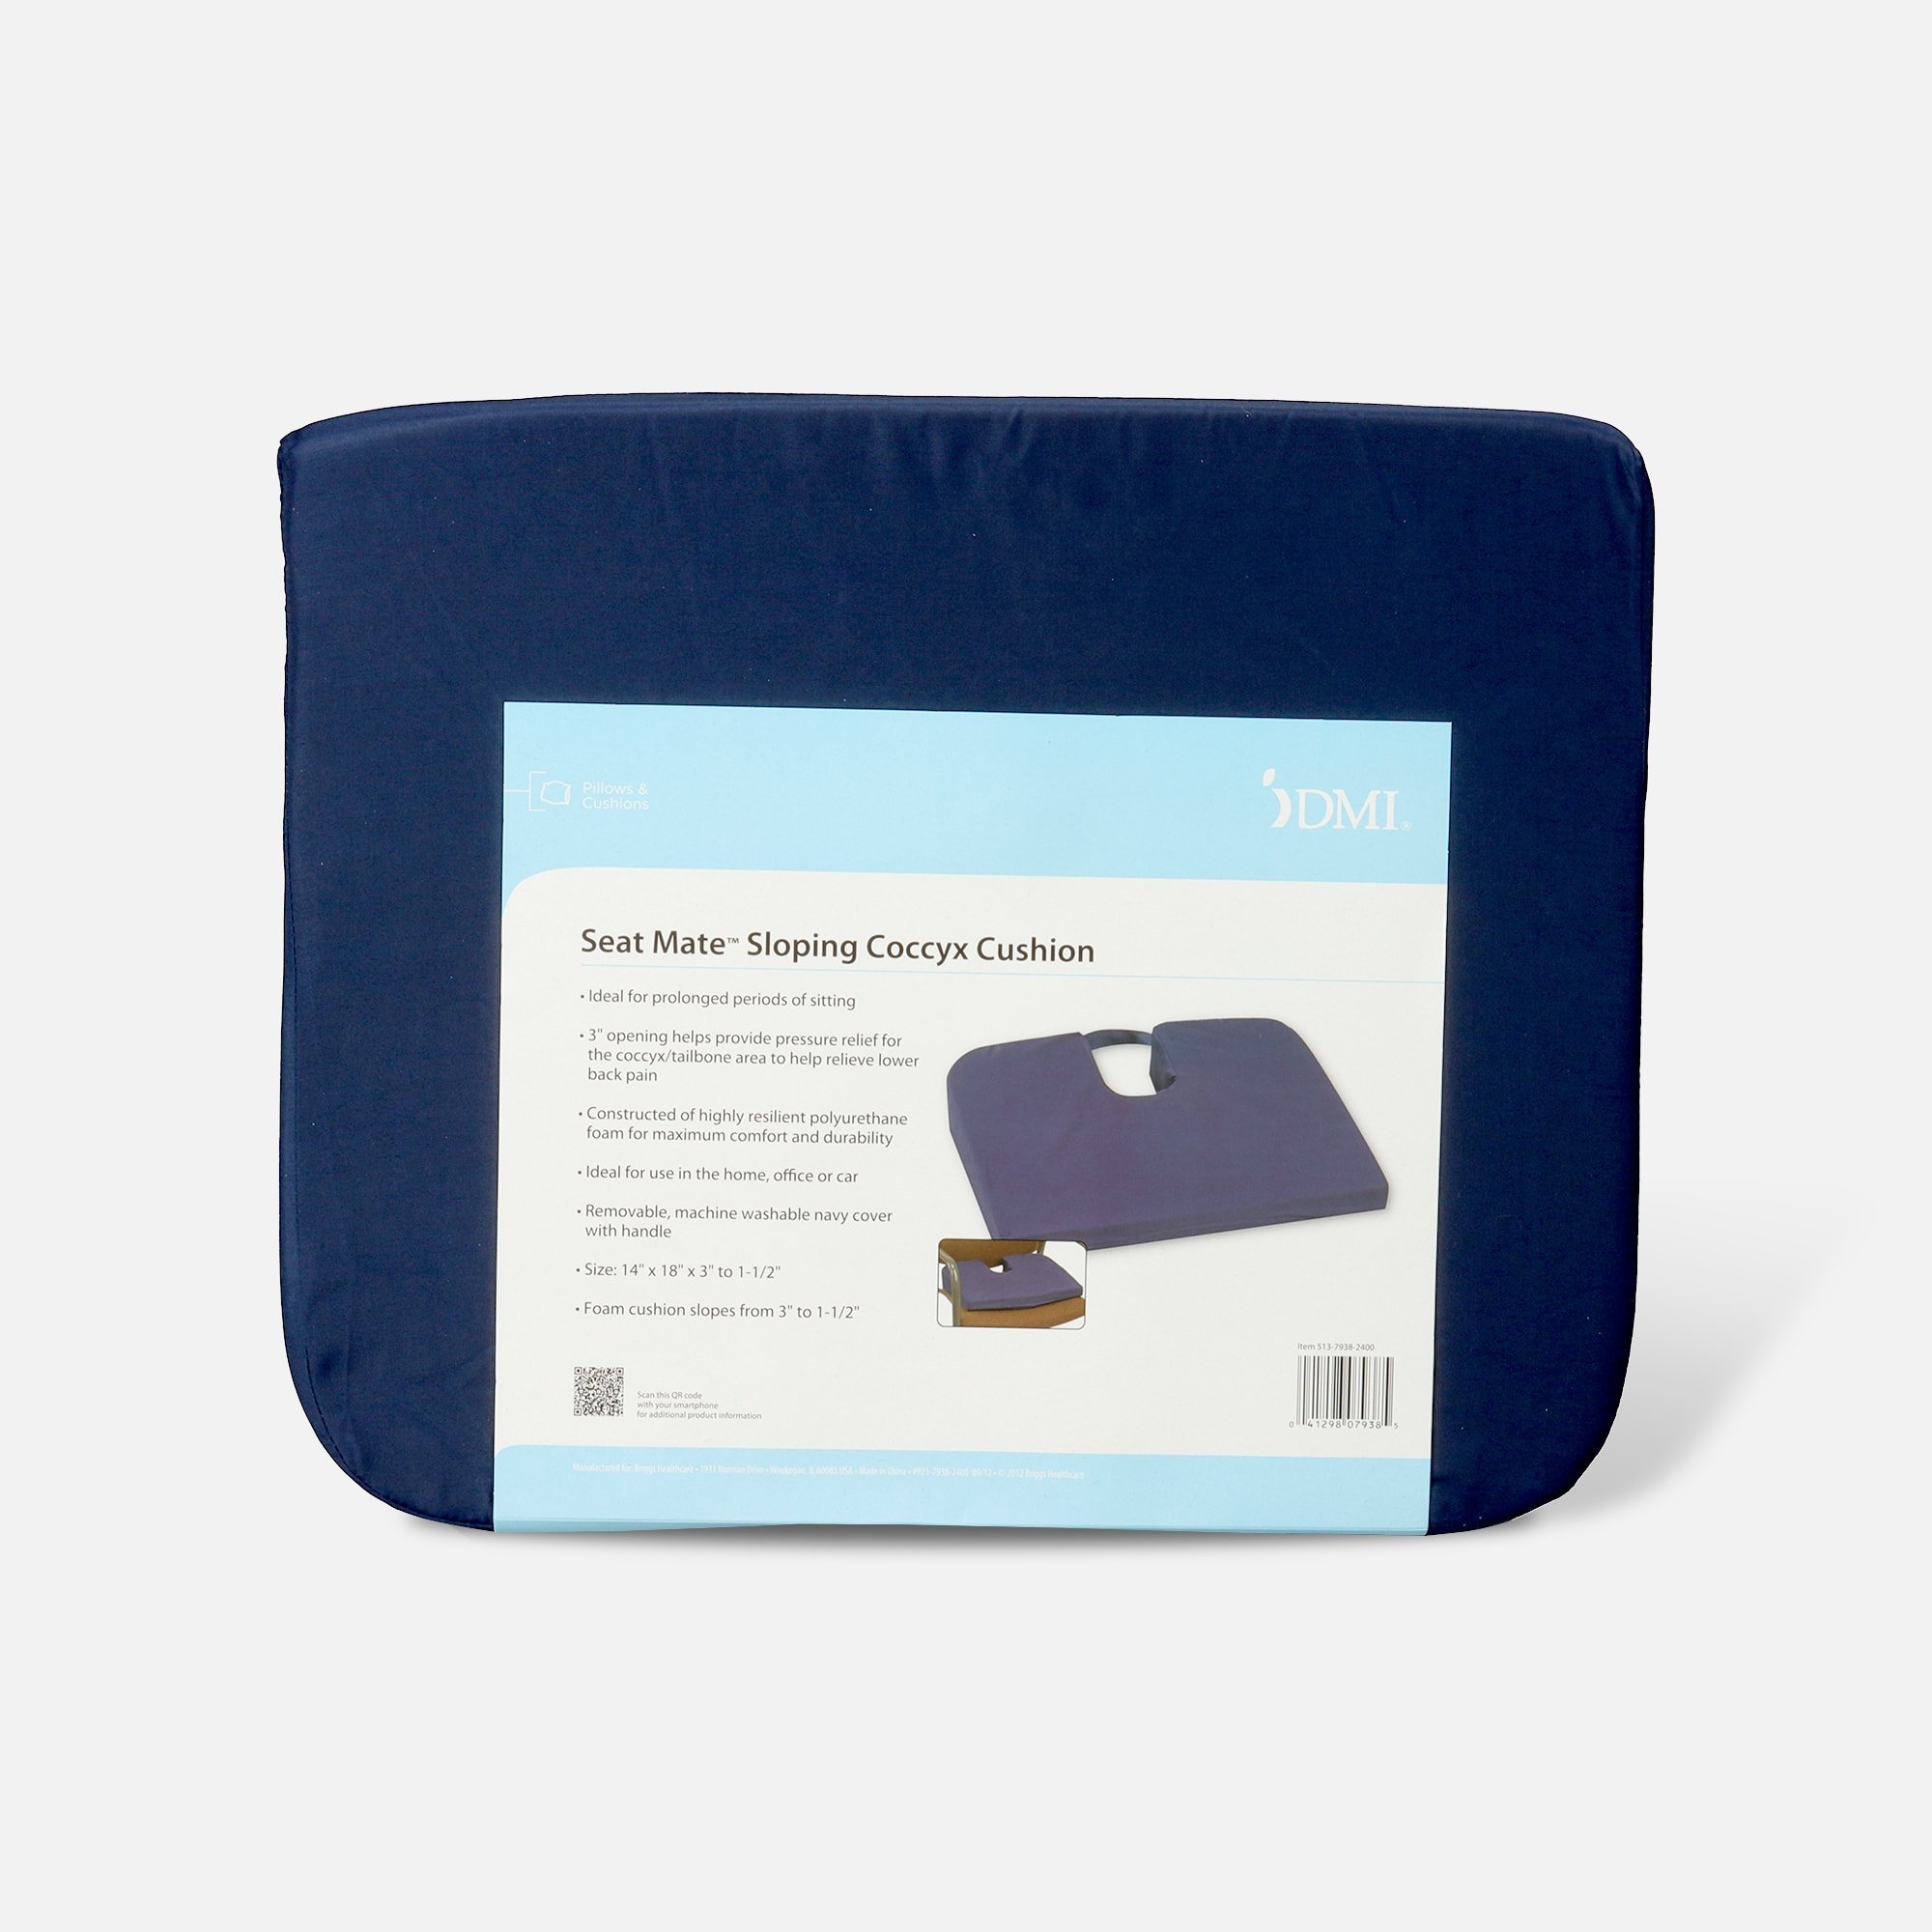 https://fsastore.com/on/demandware.static/-/Sites-hec-master/default/dwc142a926/images/large/foam-seat-cushion-for-coccyx-support-18-x-14-x-1-5-to-3-inches-navy-18201-1.jpg